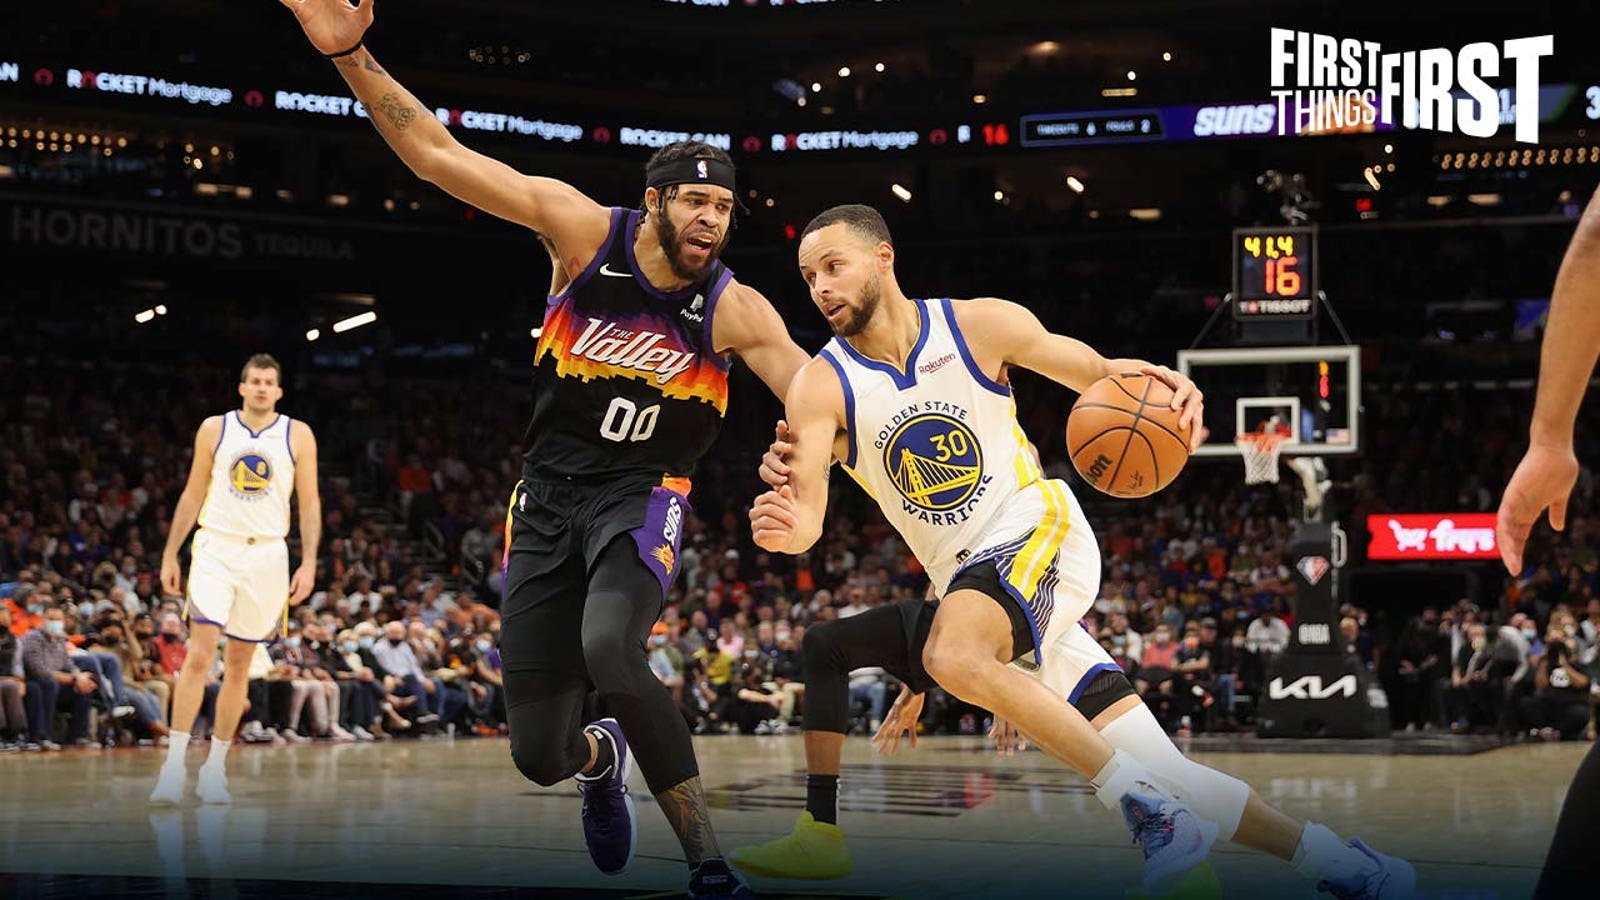 Chris Broussard: Suns looked dominant against a 'small' Warriors team I FIRST THINGS FIRST